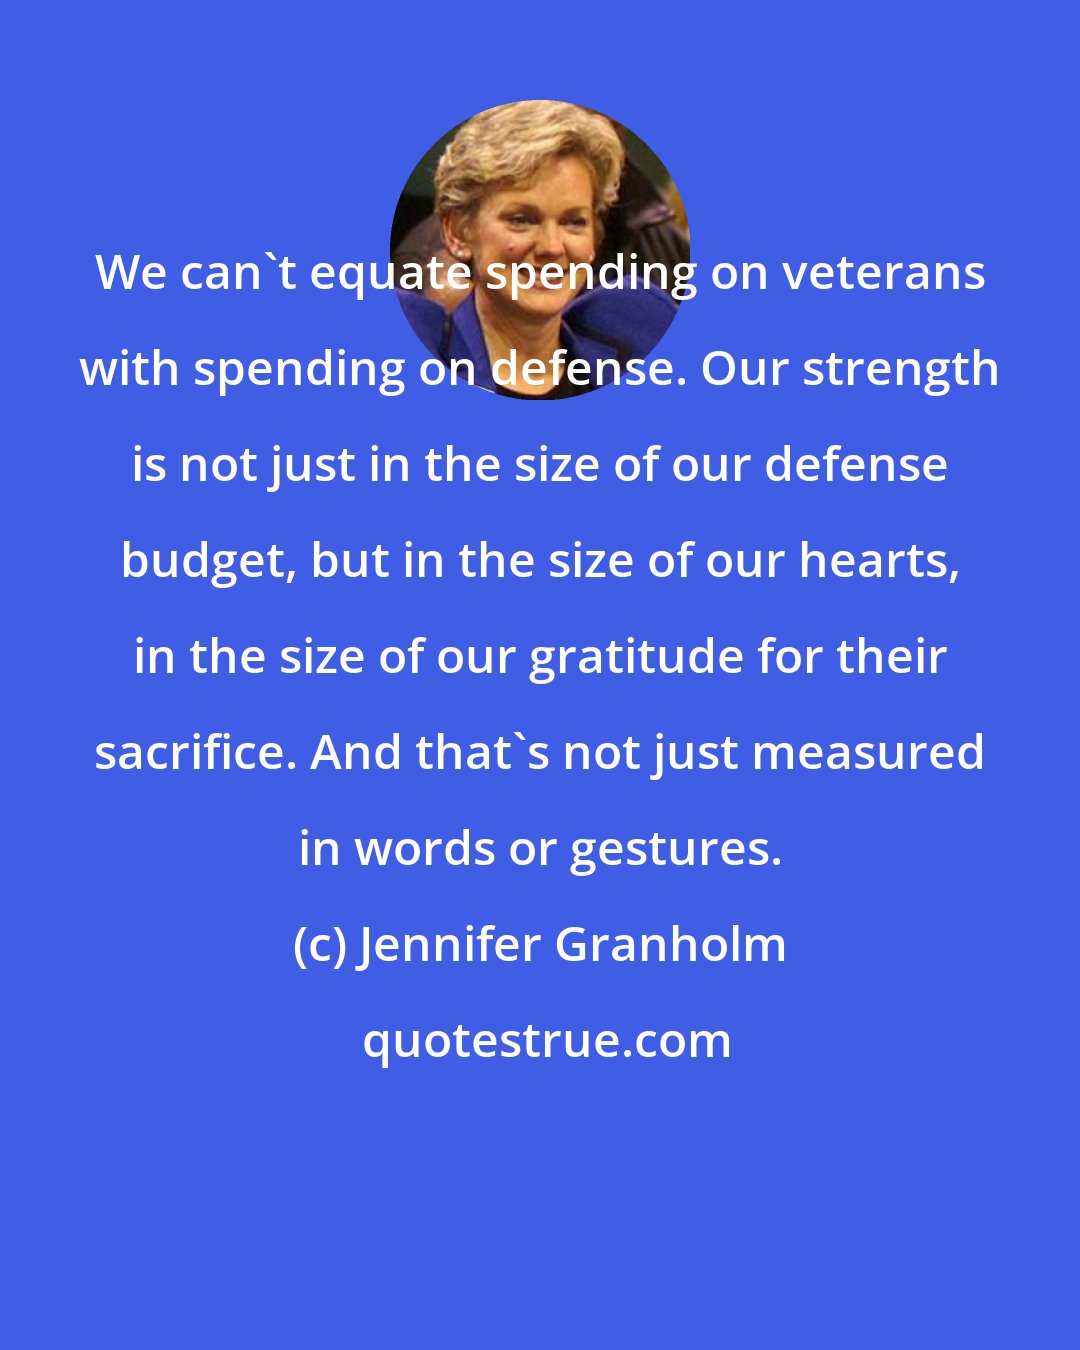 Jennifer Granholm: We can't equate spending on veterans with spending on defense. Our strength is not just in the size of our defense budget, but in the size of our hearts, in the size of our gratitude for their sacrifice. And that's not just measured in words or gestures.